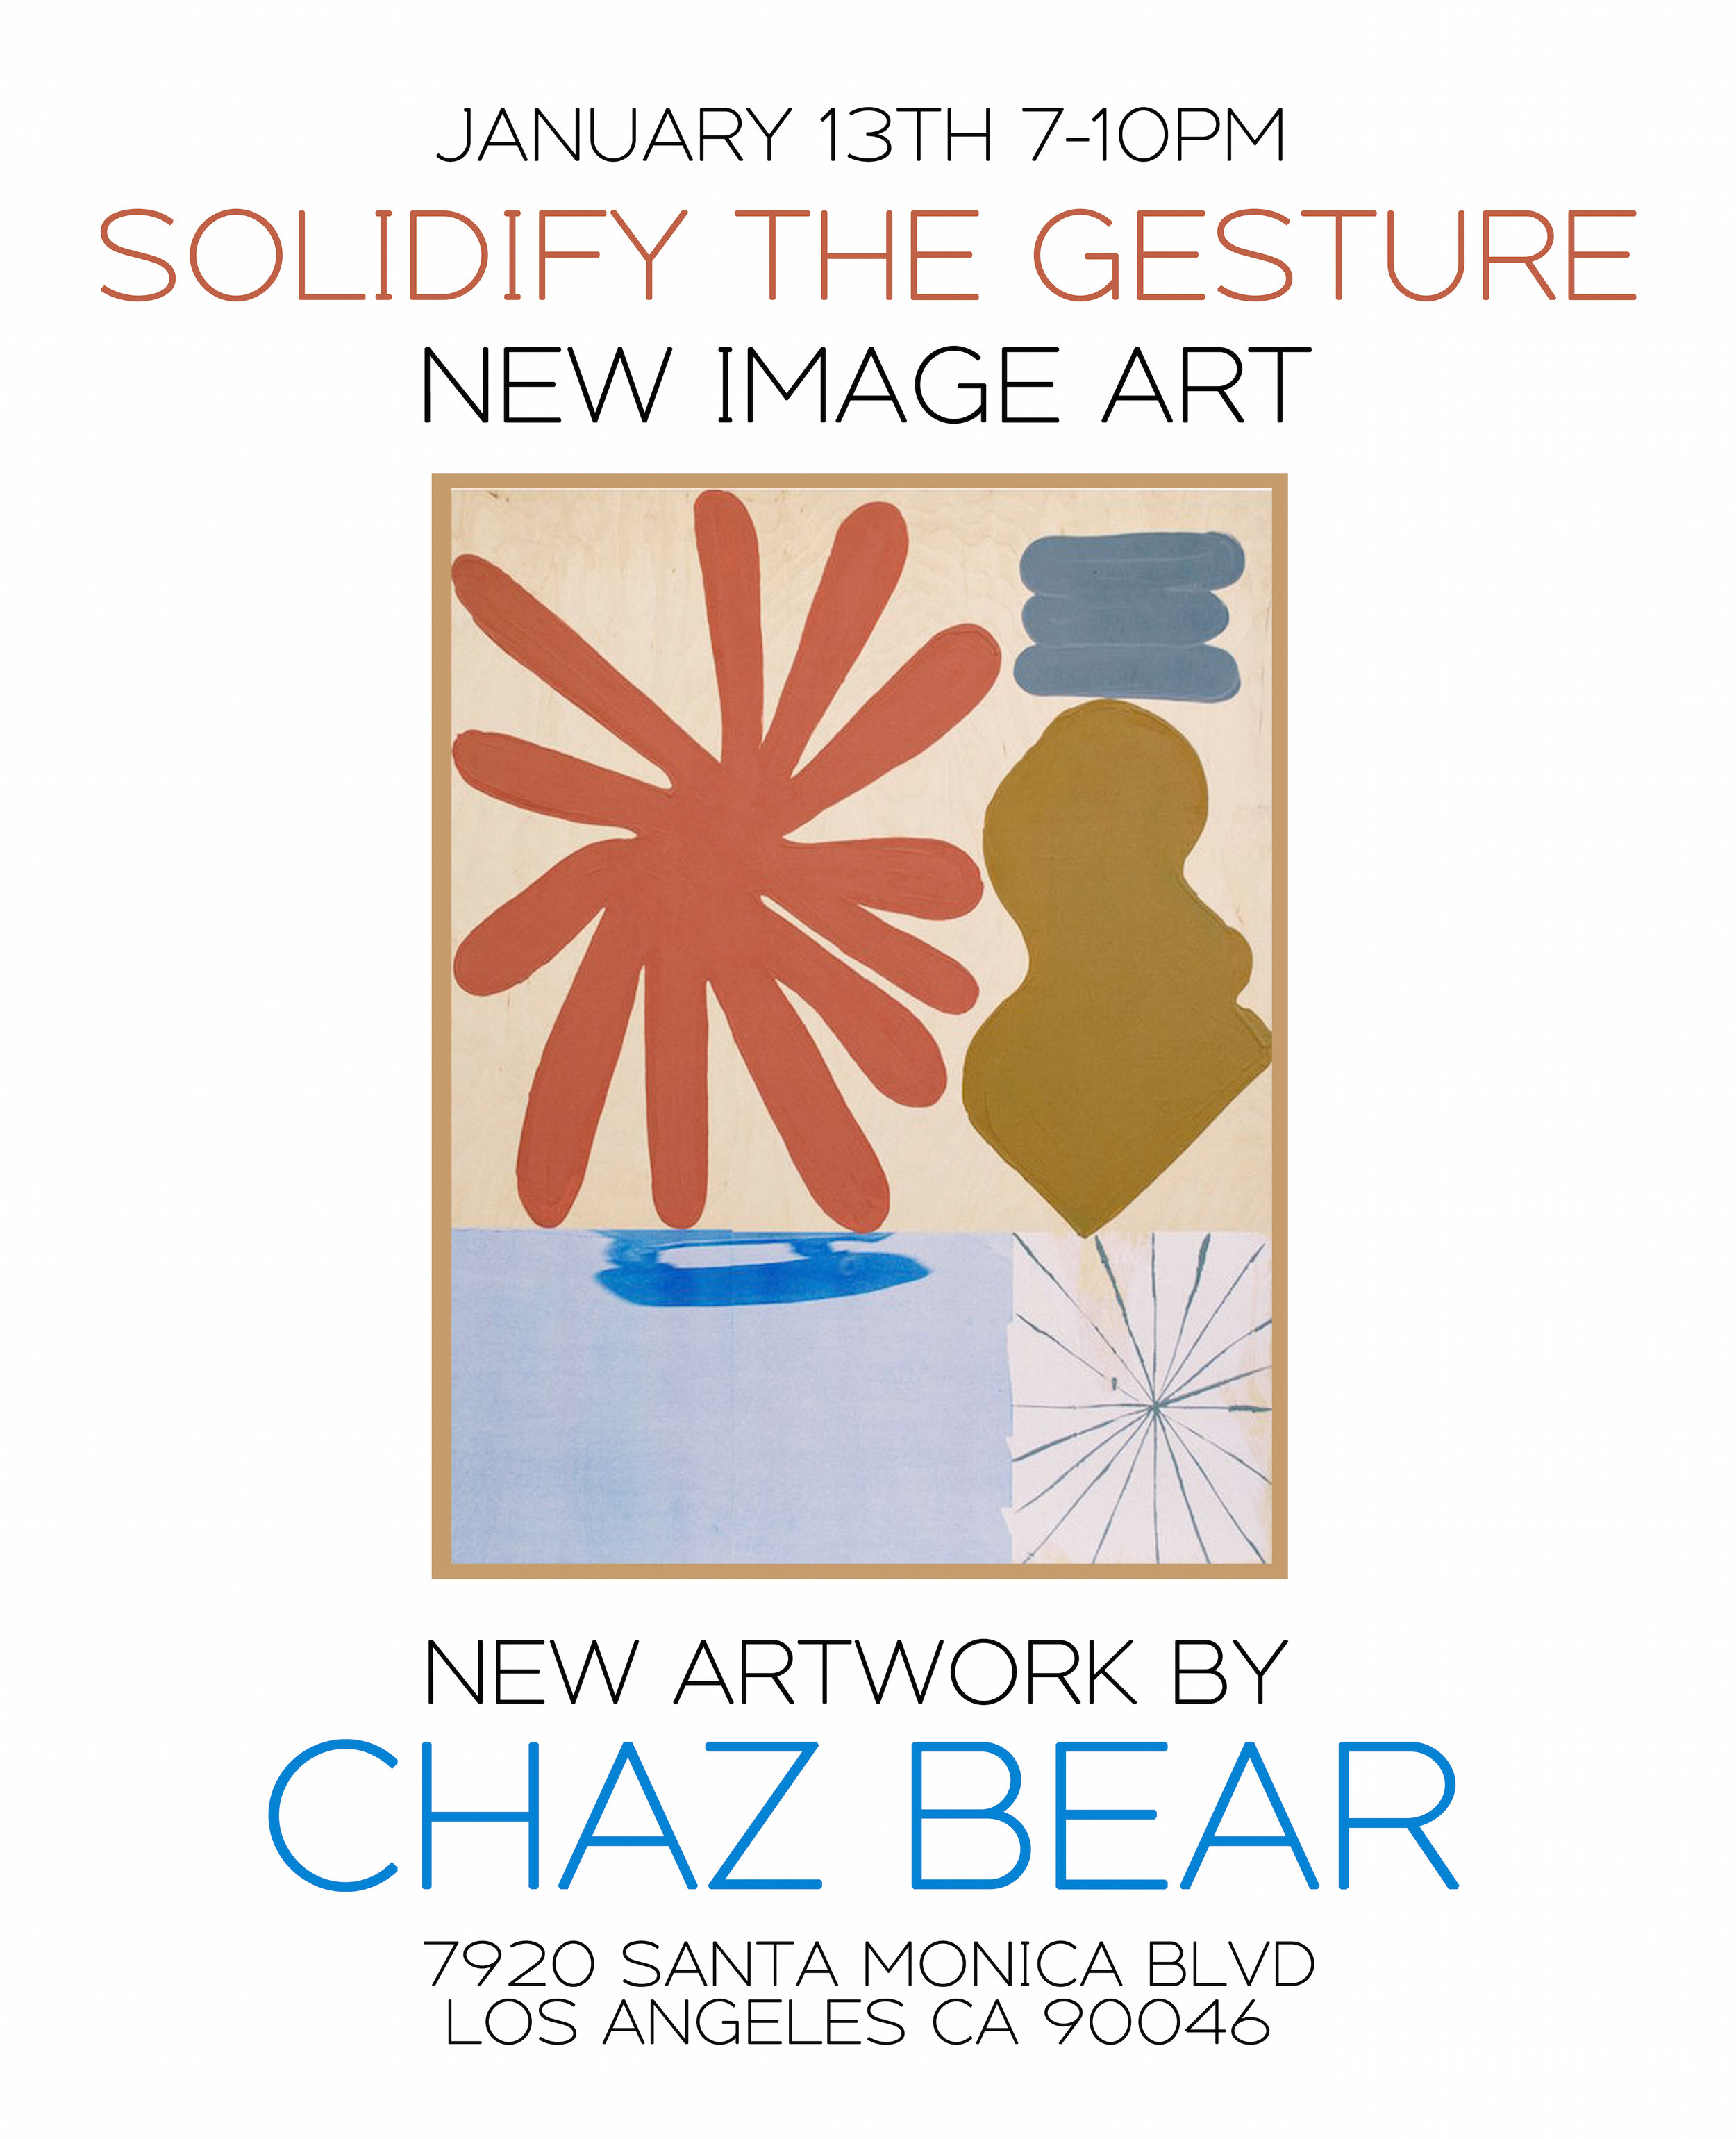 CHAZ BEAR - SOLIDIFY THE GESTURE